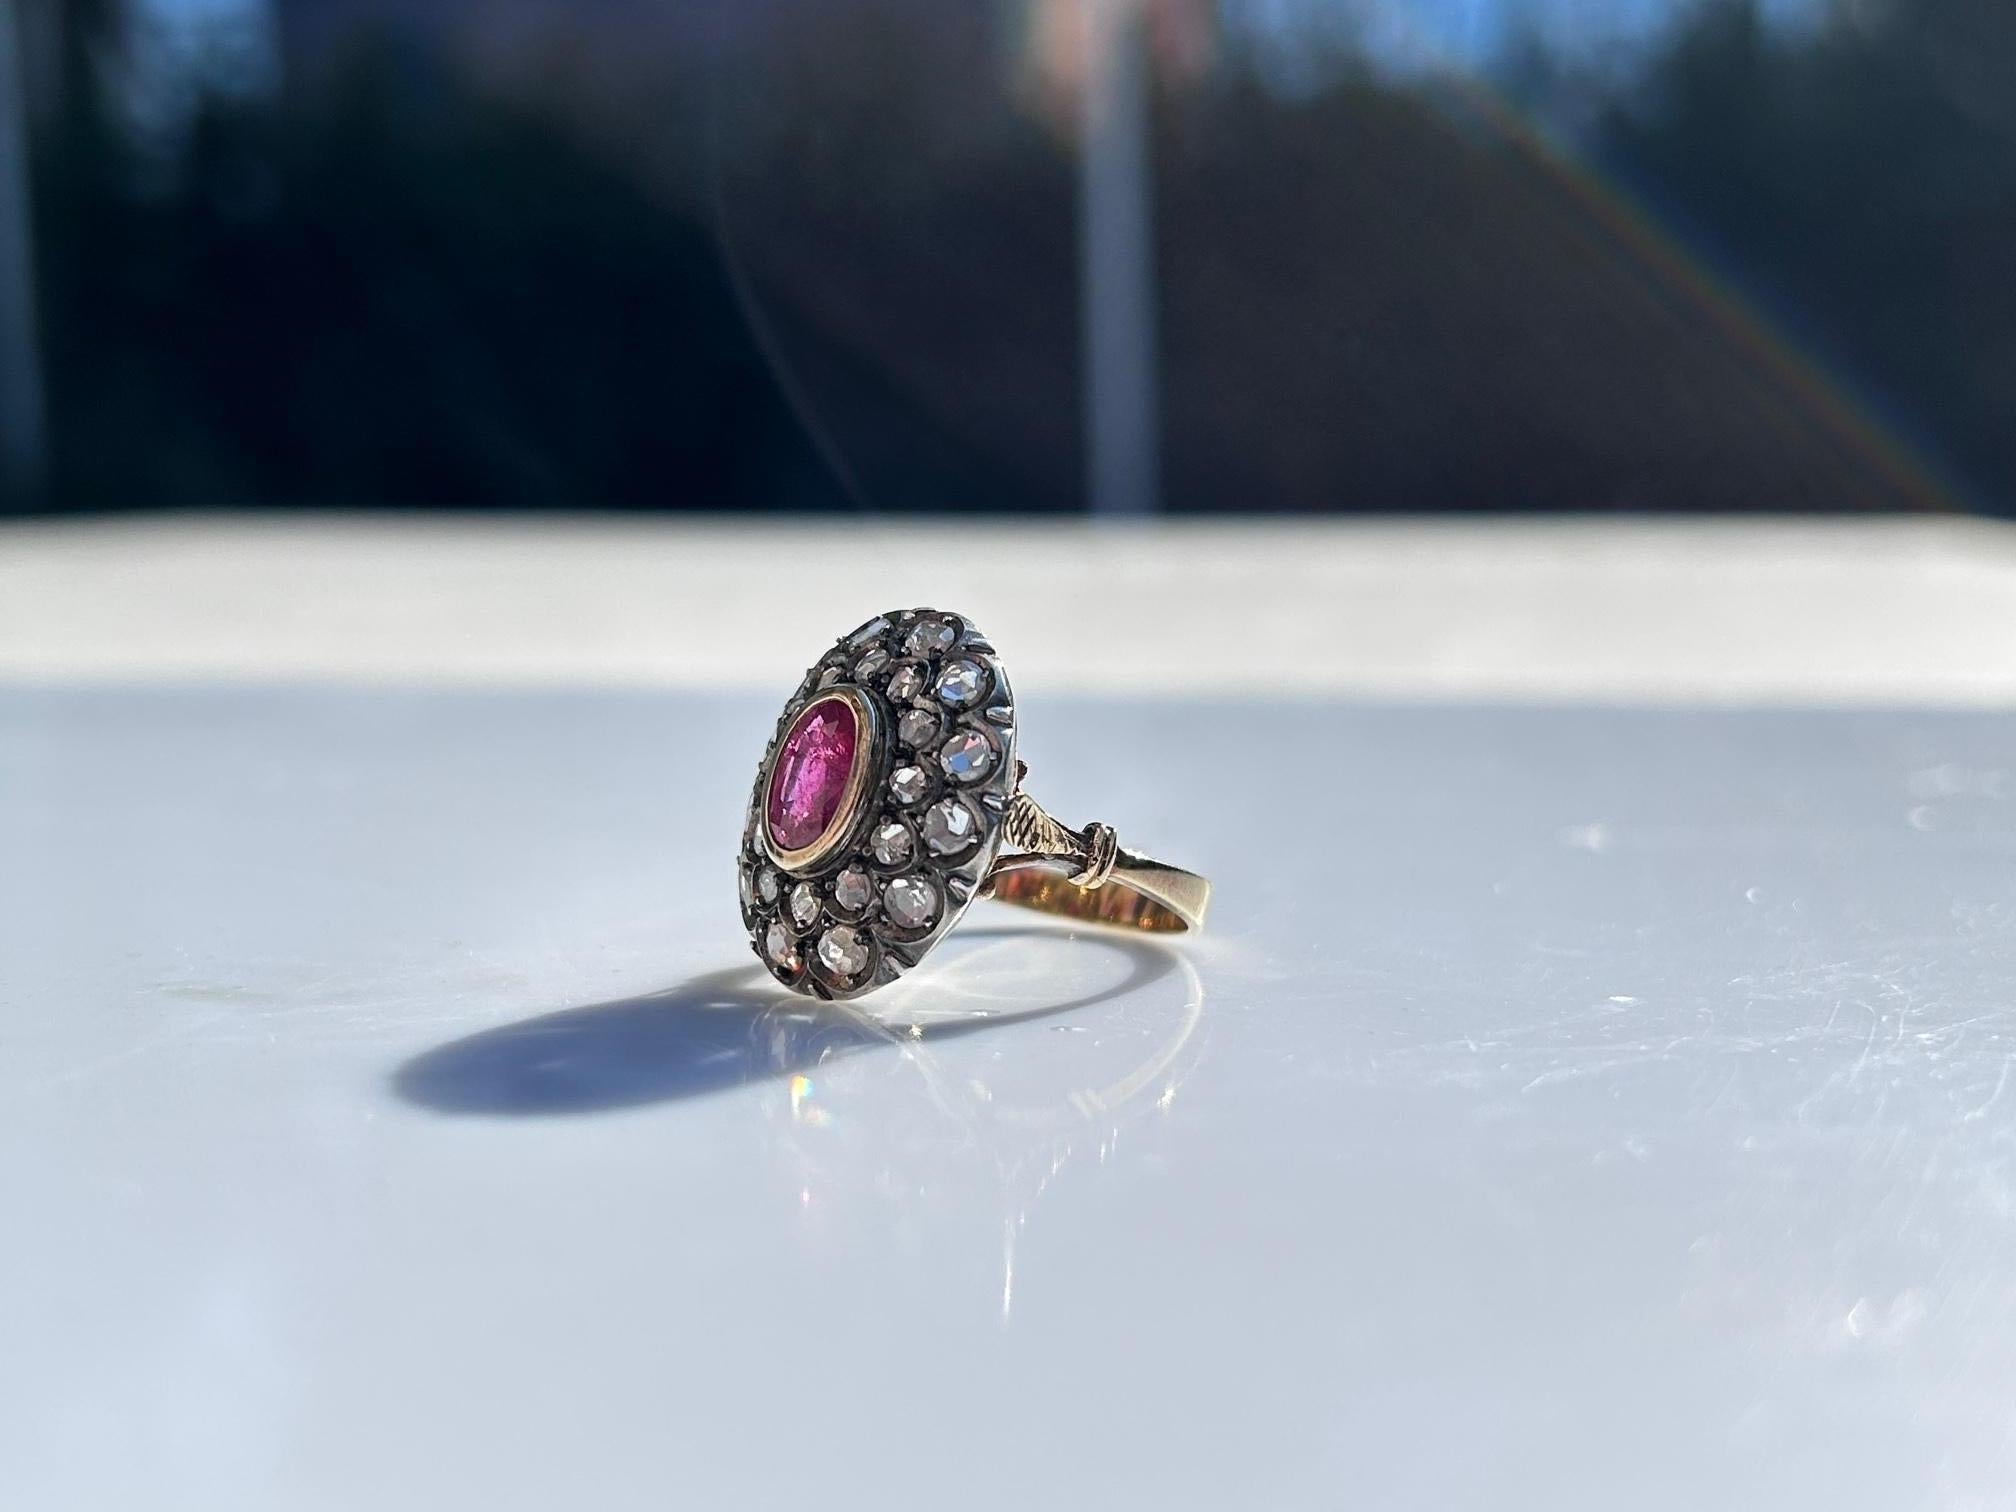 Antique dome ring made in 18 Kt yellow gold and 800 silver.
This vintage ring dates early 1900s. 
Ring has been left in its antique condition.
The oval cut Ruby measures approximately mm 8x6 ( 0.31x0.23 in ) and it is embellished by 24 rose-cut